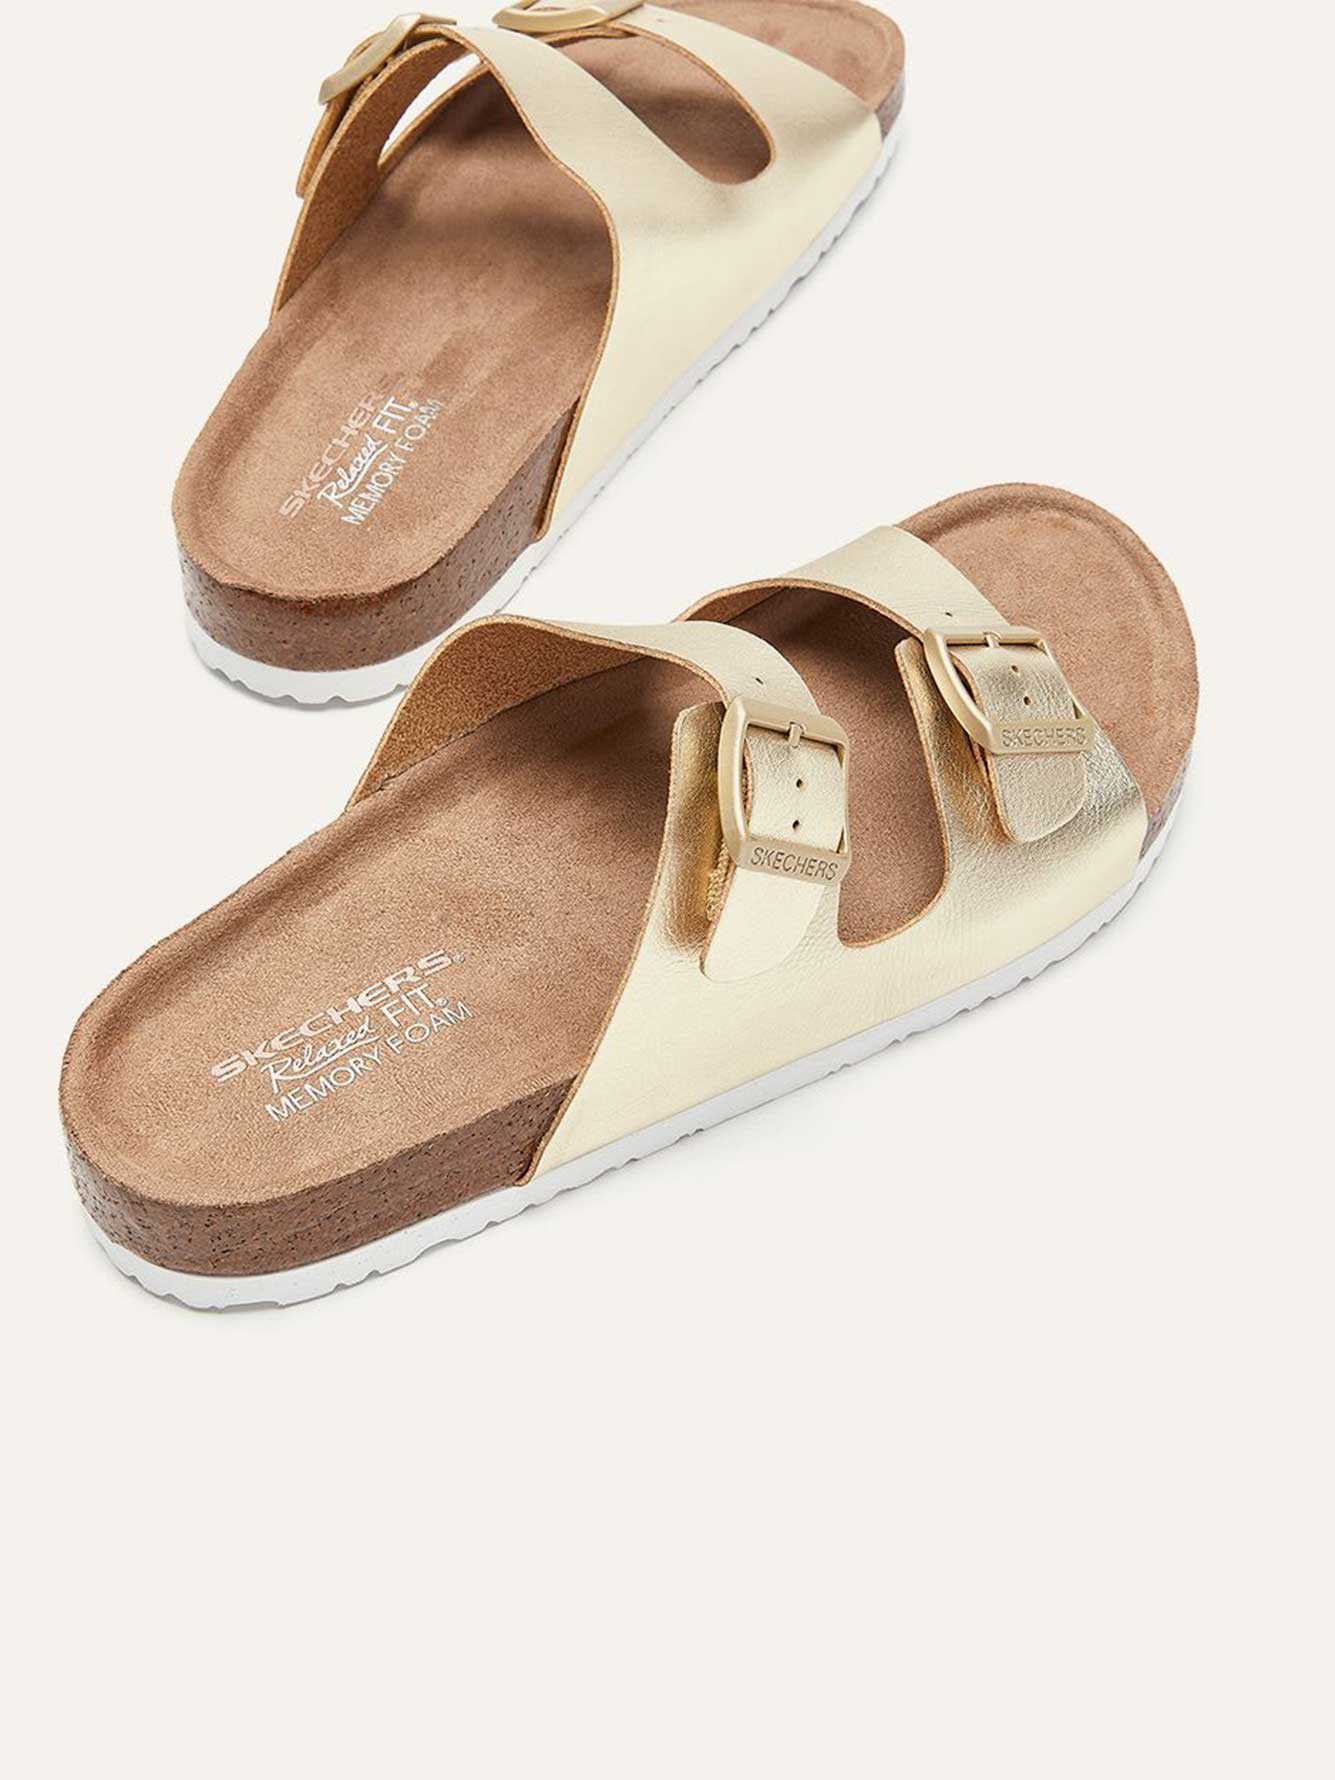 Skechers Relaxed Fit, Granola Missus Hippie - Wide Width Sandals |